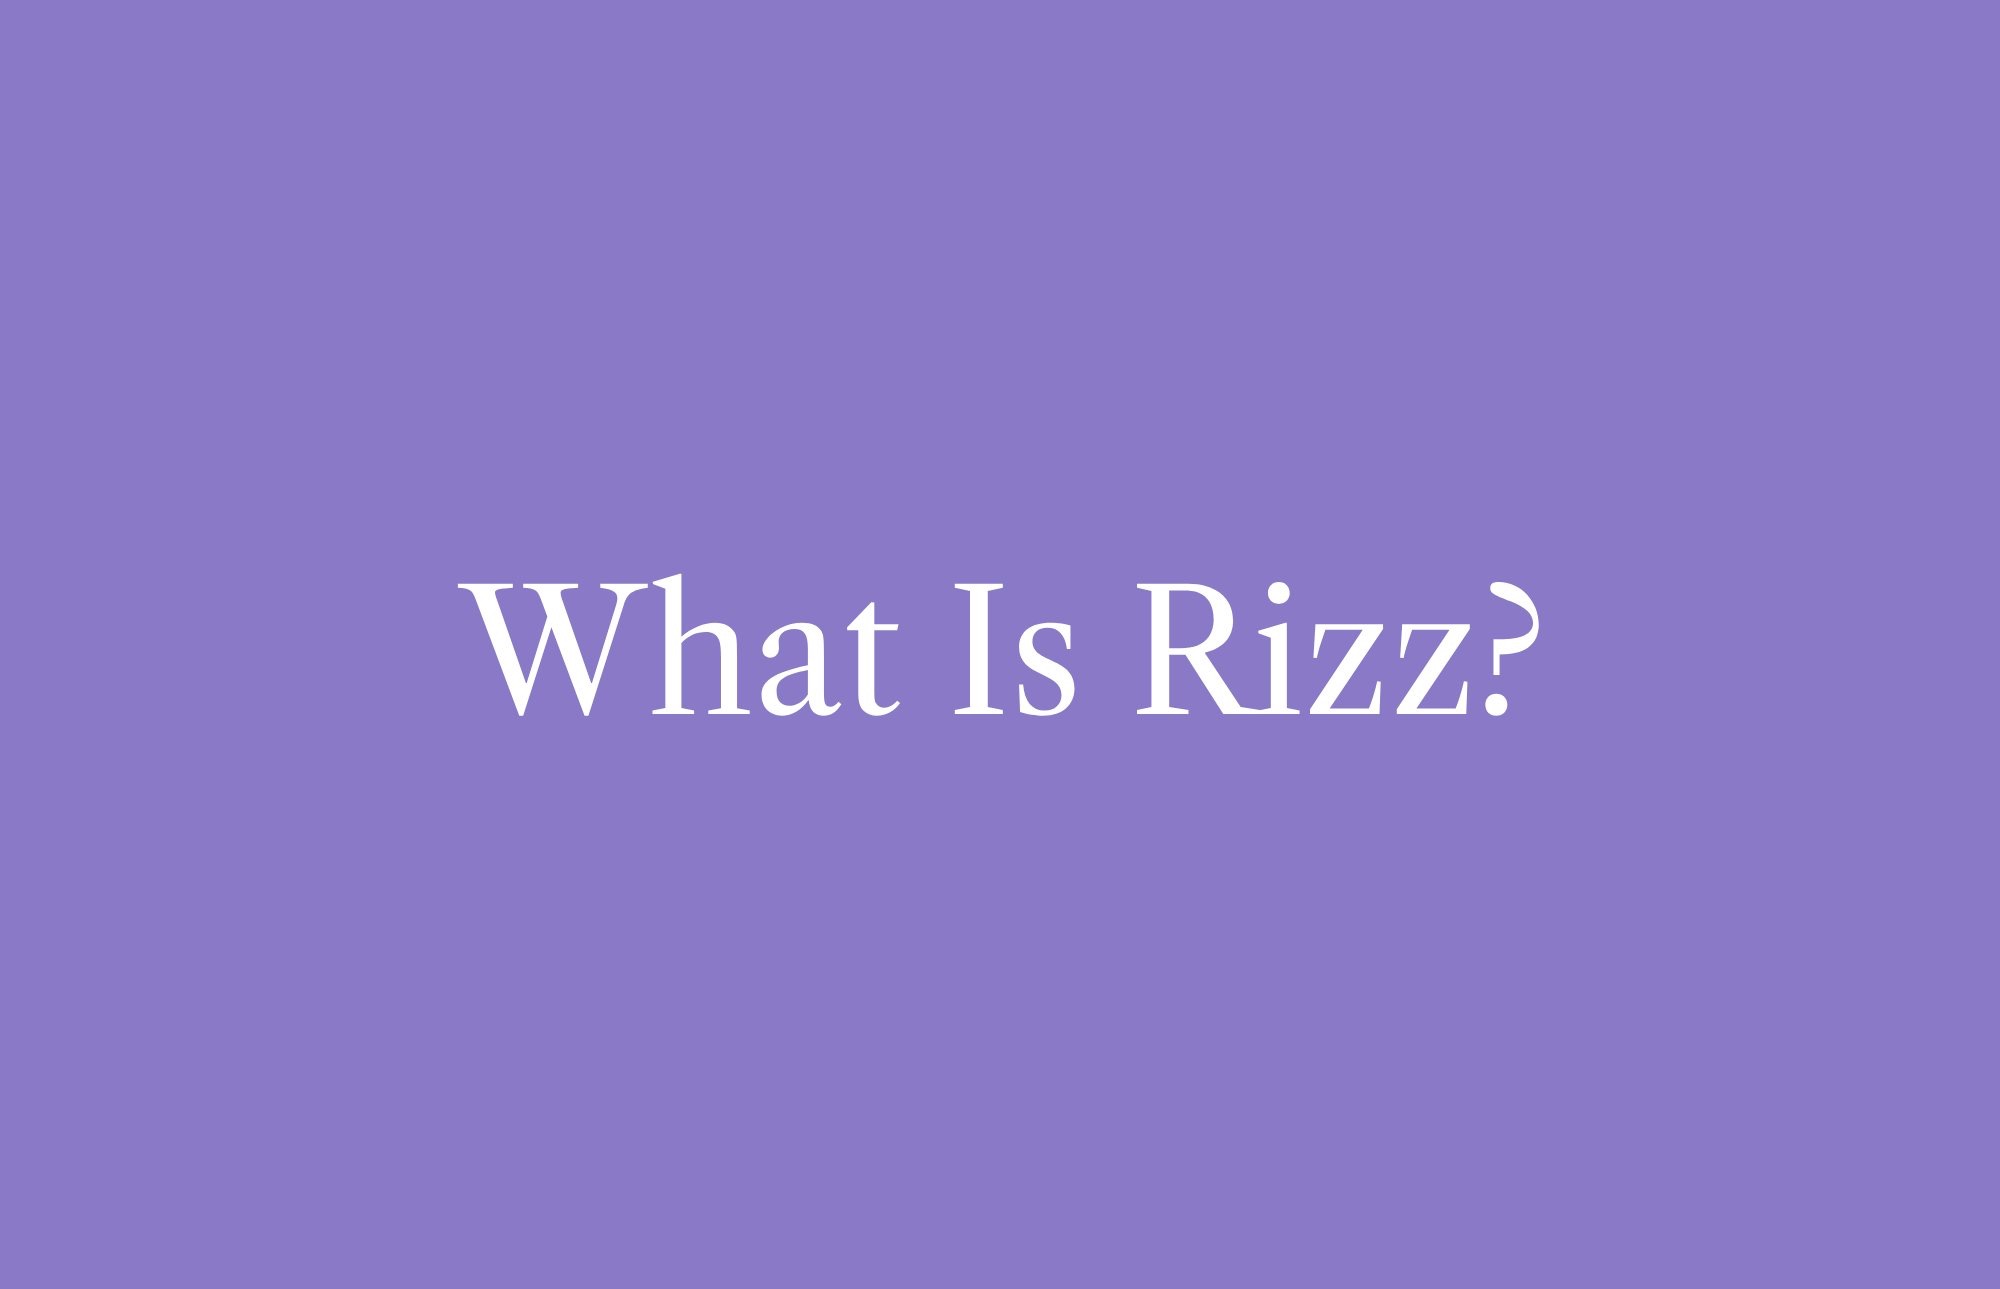 rizz meaning